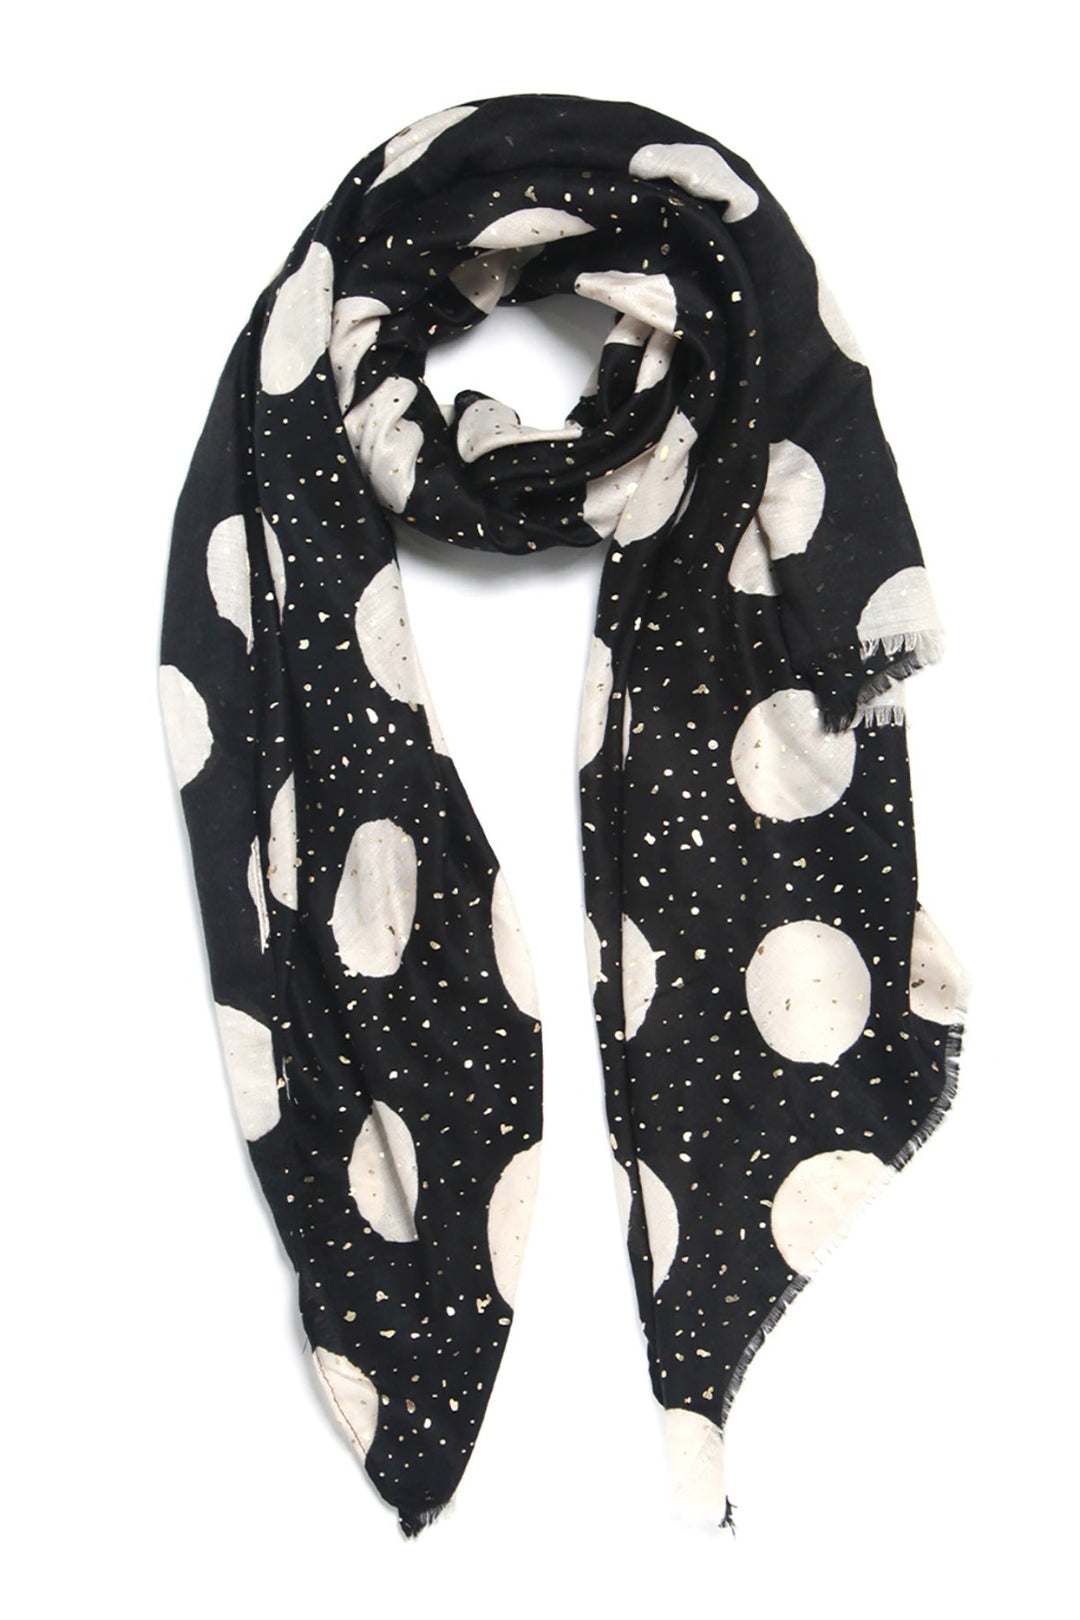 Gold spot scarf in navy